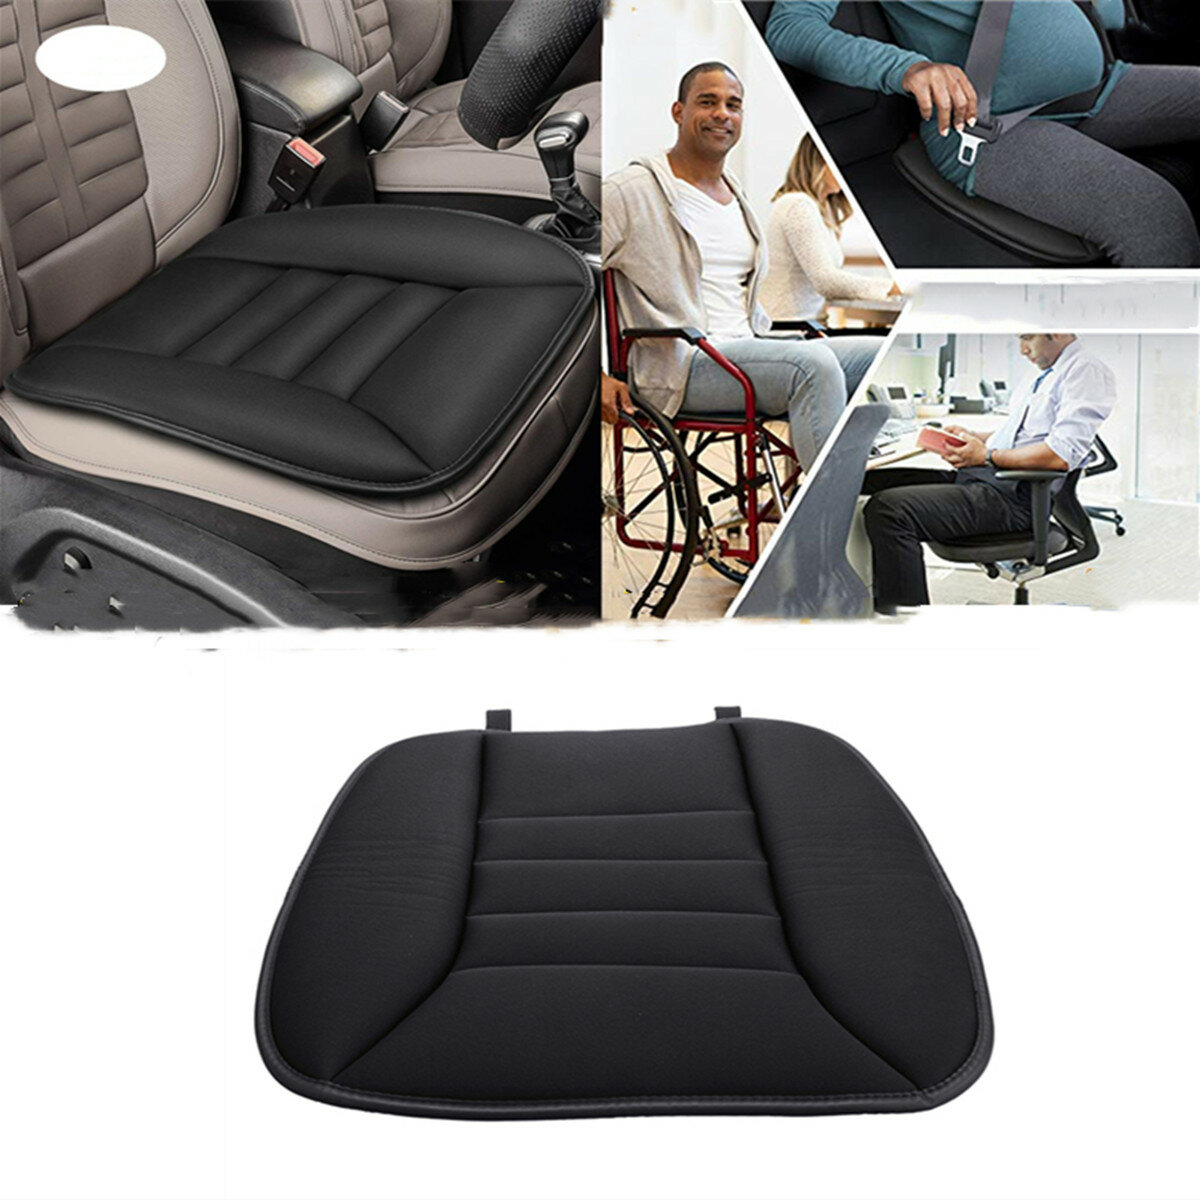 Tsumbay Car Seat Cushion Anti-skidding Soft Driver Seater Protector Pad TS-CC01 Memory Foam Universal for Home Car Offic